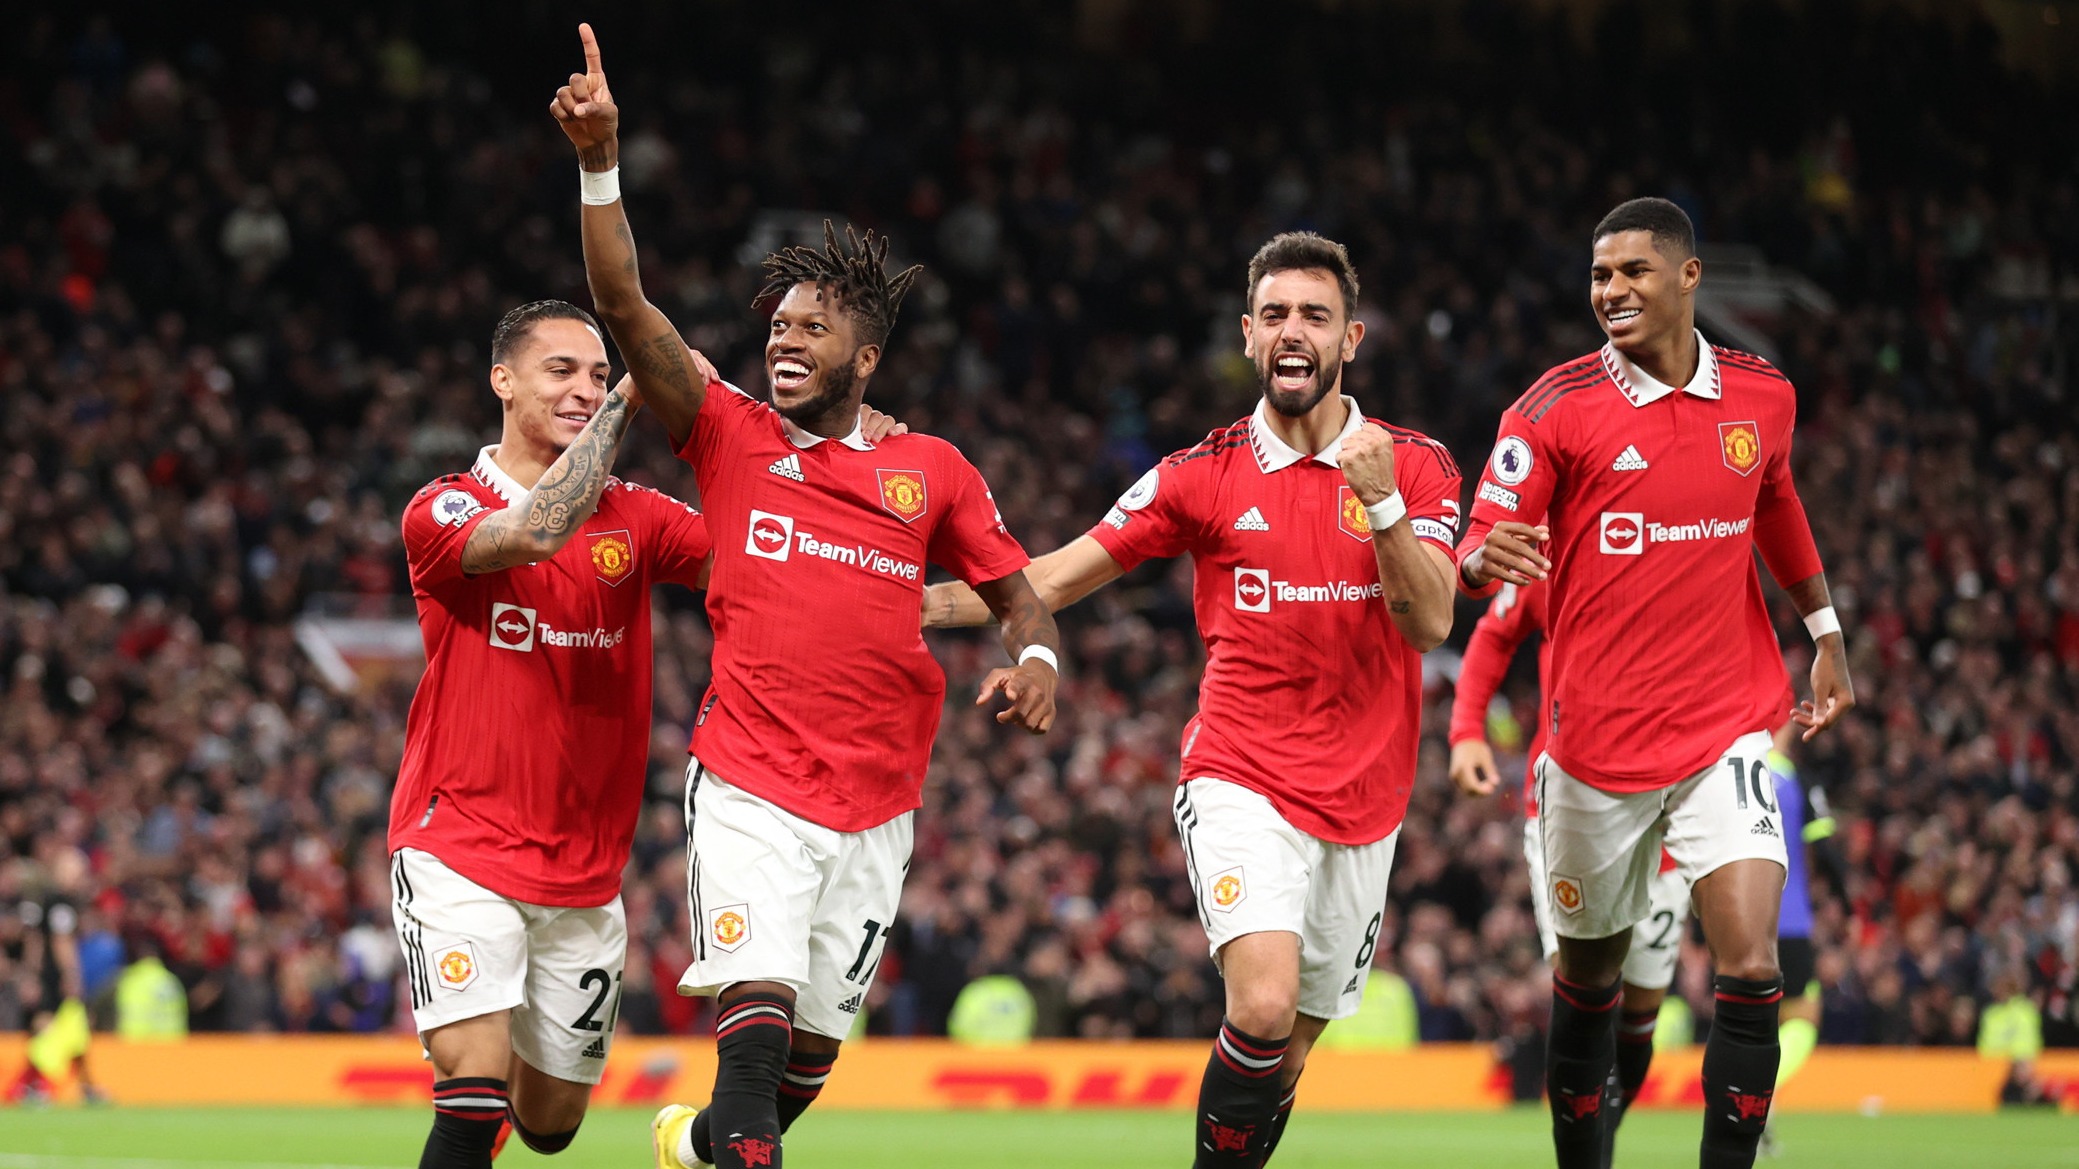 Manchester United's expected squad against Real Betis in the Europa League